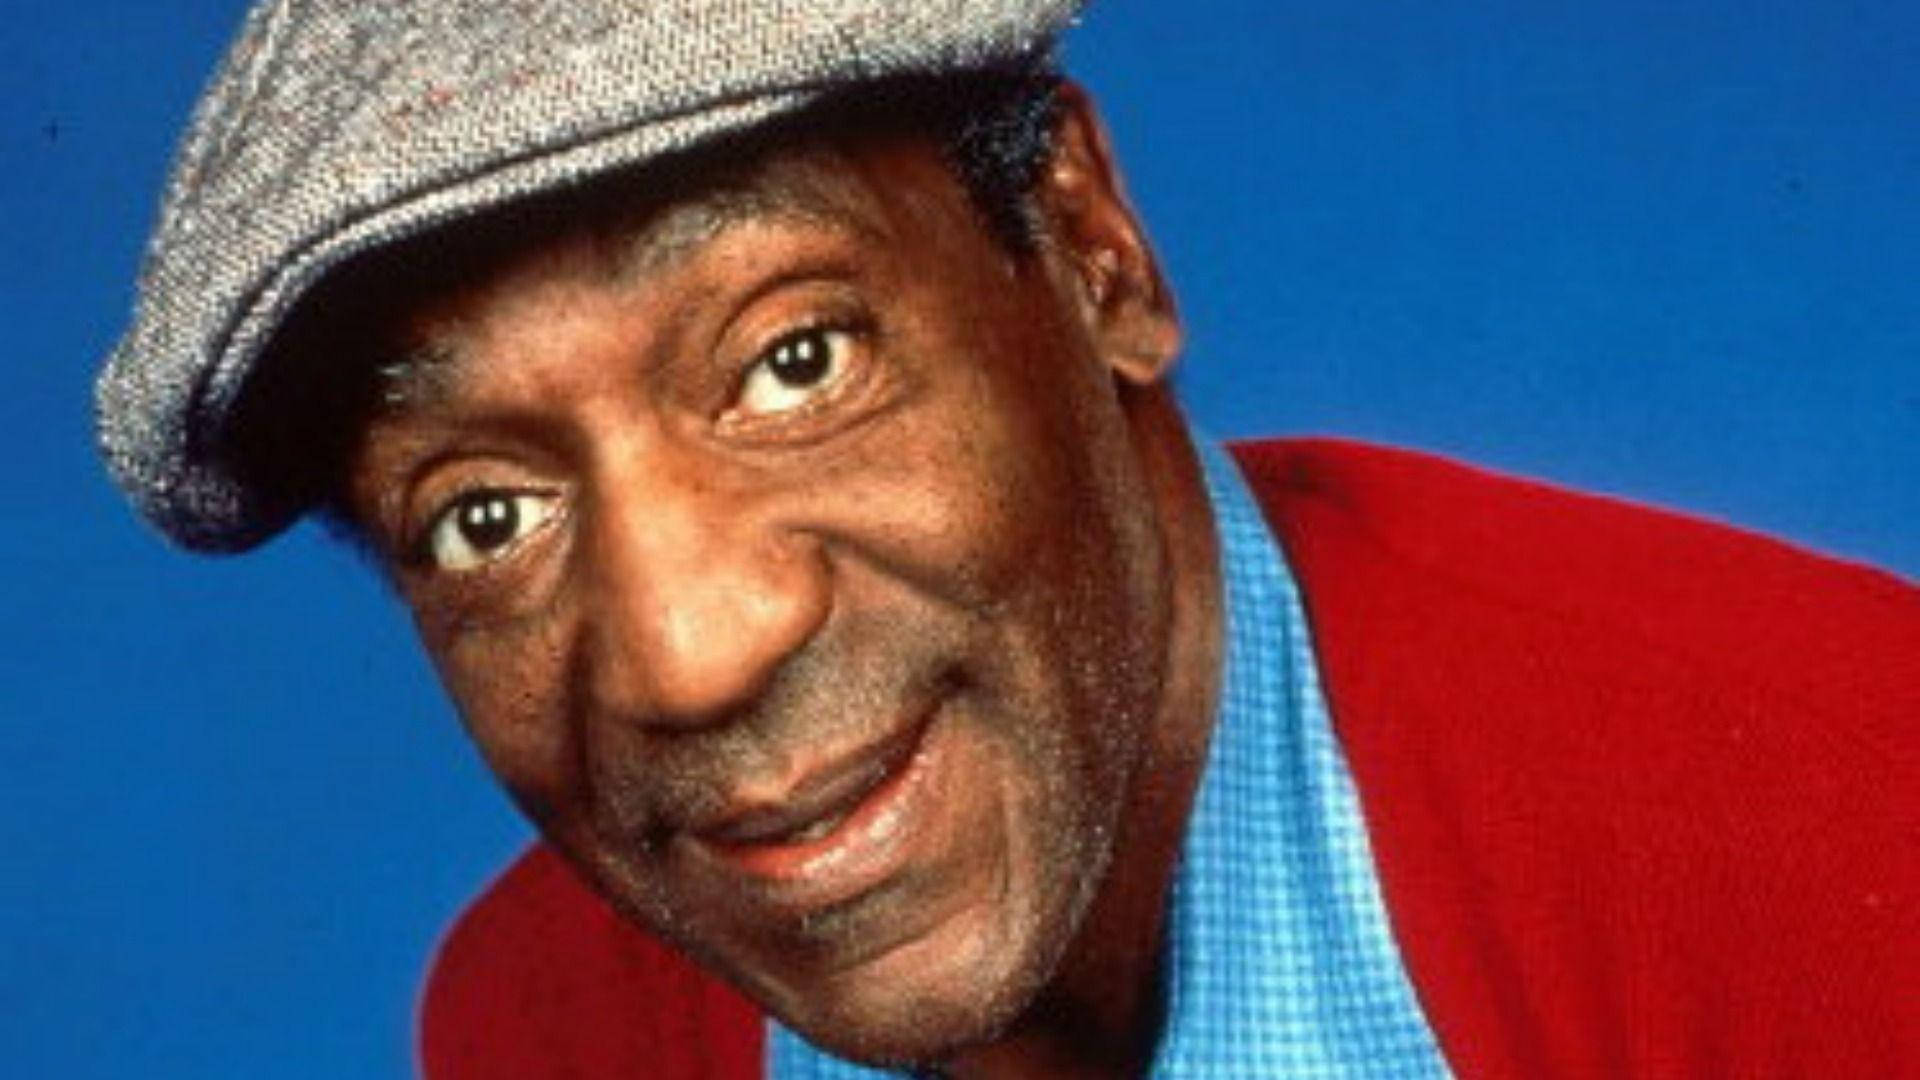 Bill Cosby with a joyous smile Wallpaper